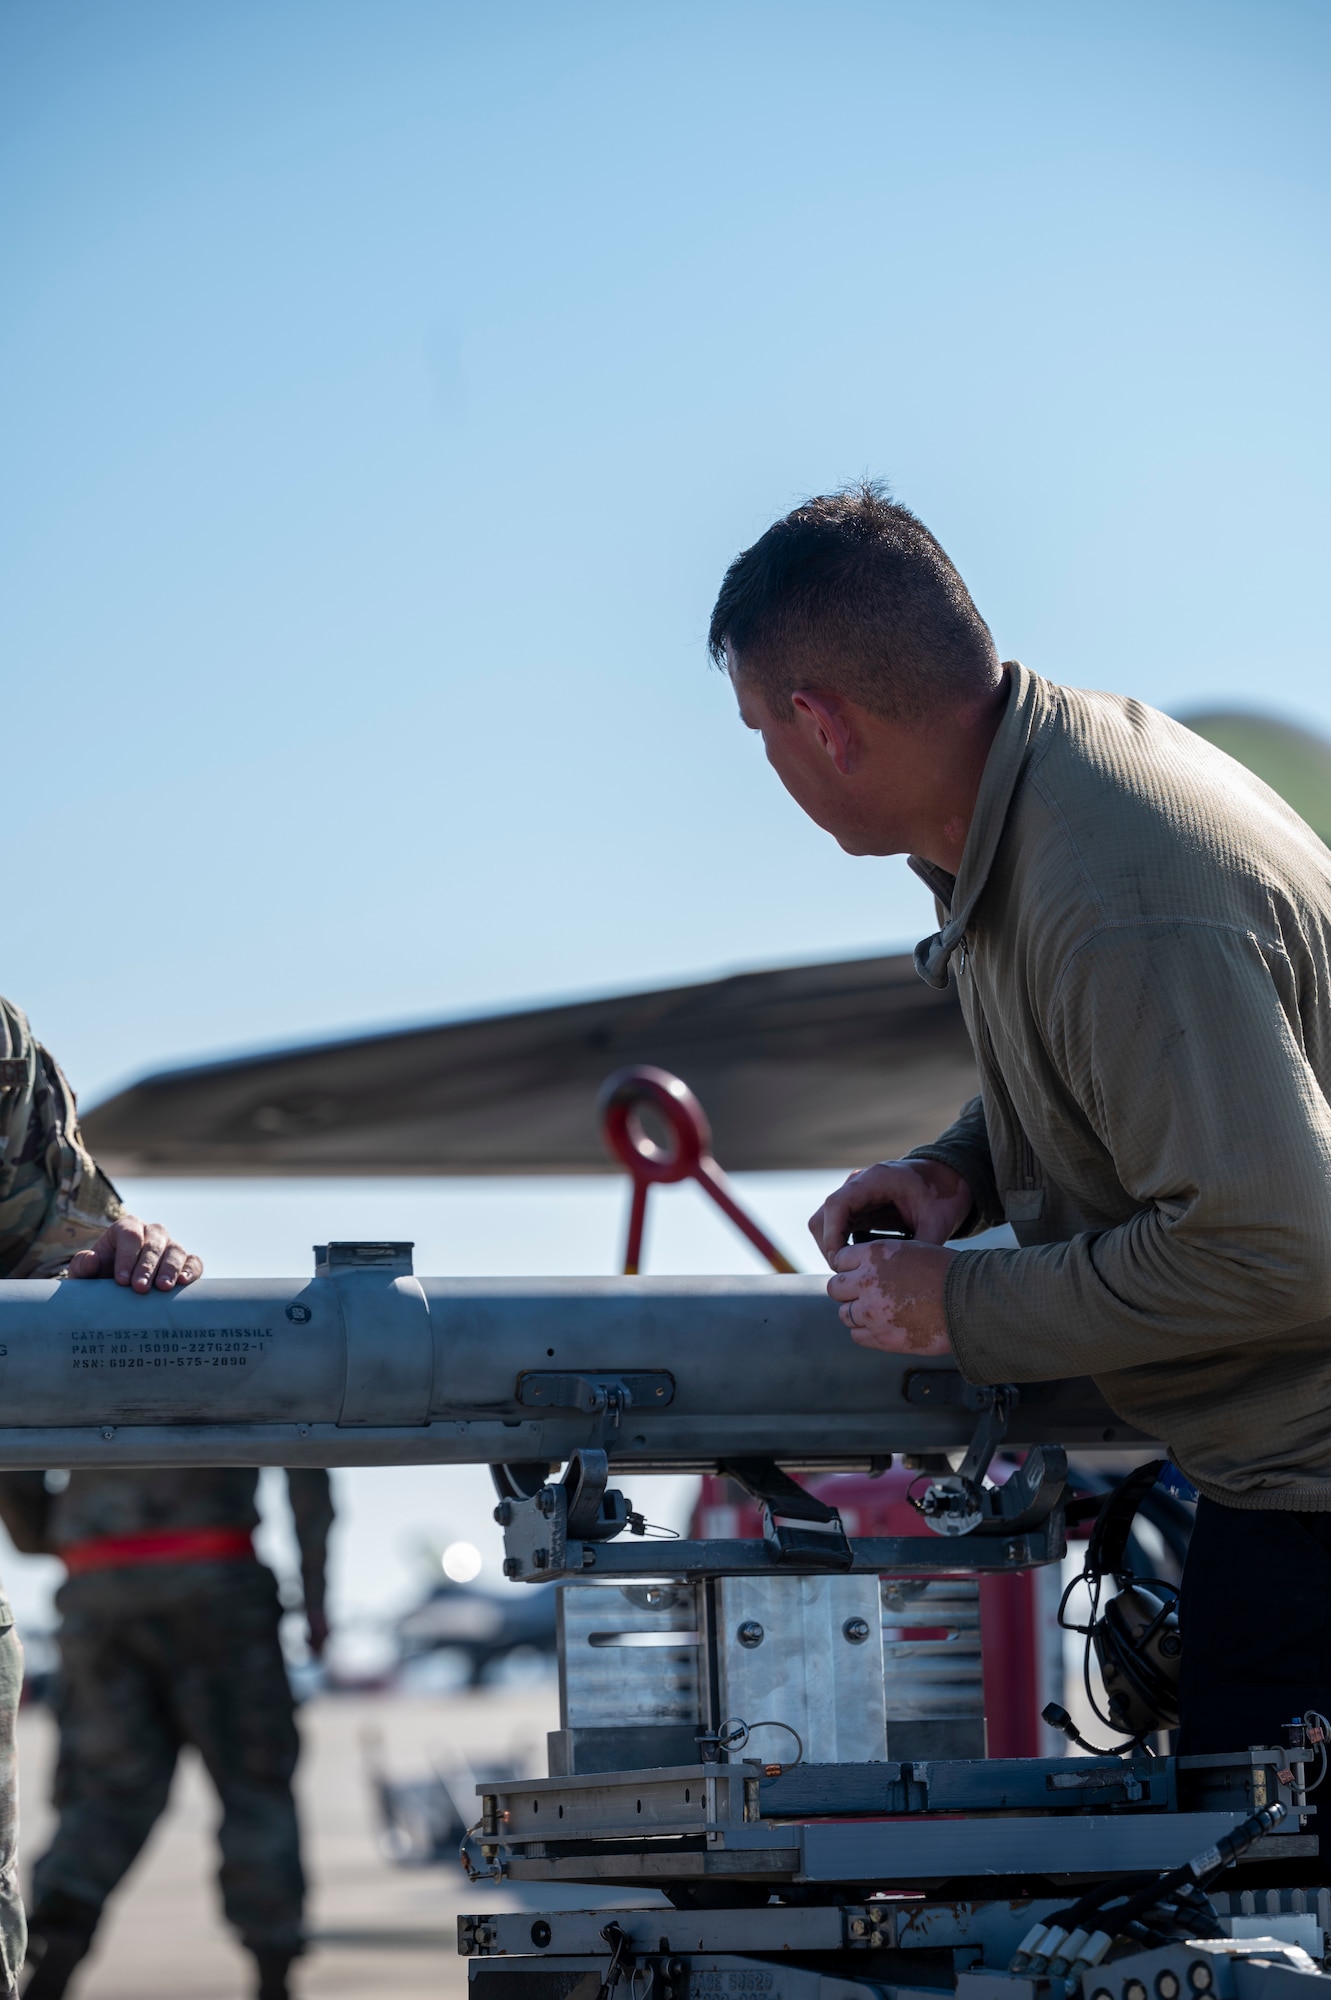 Airman secures a missile to a cart